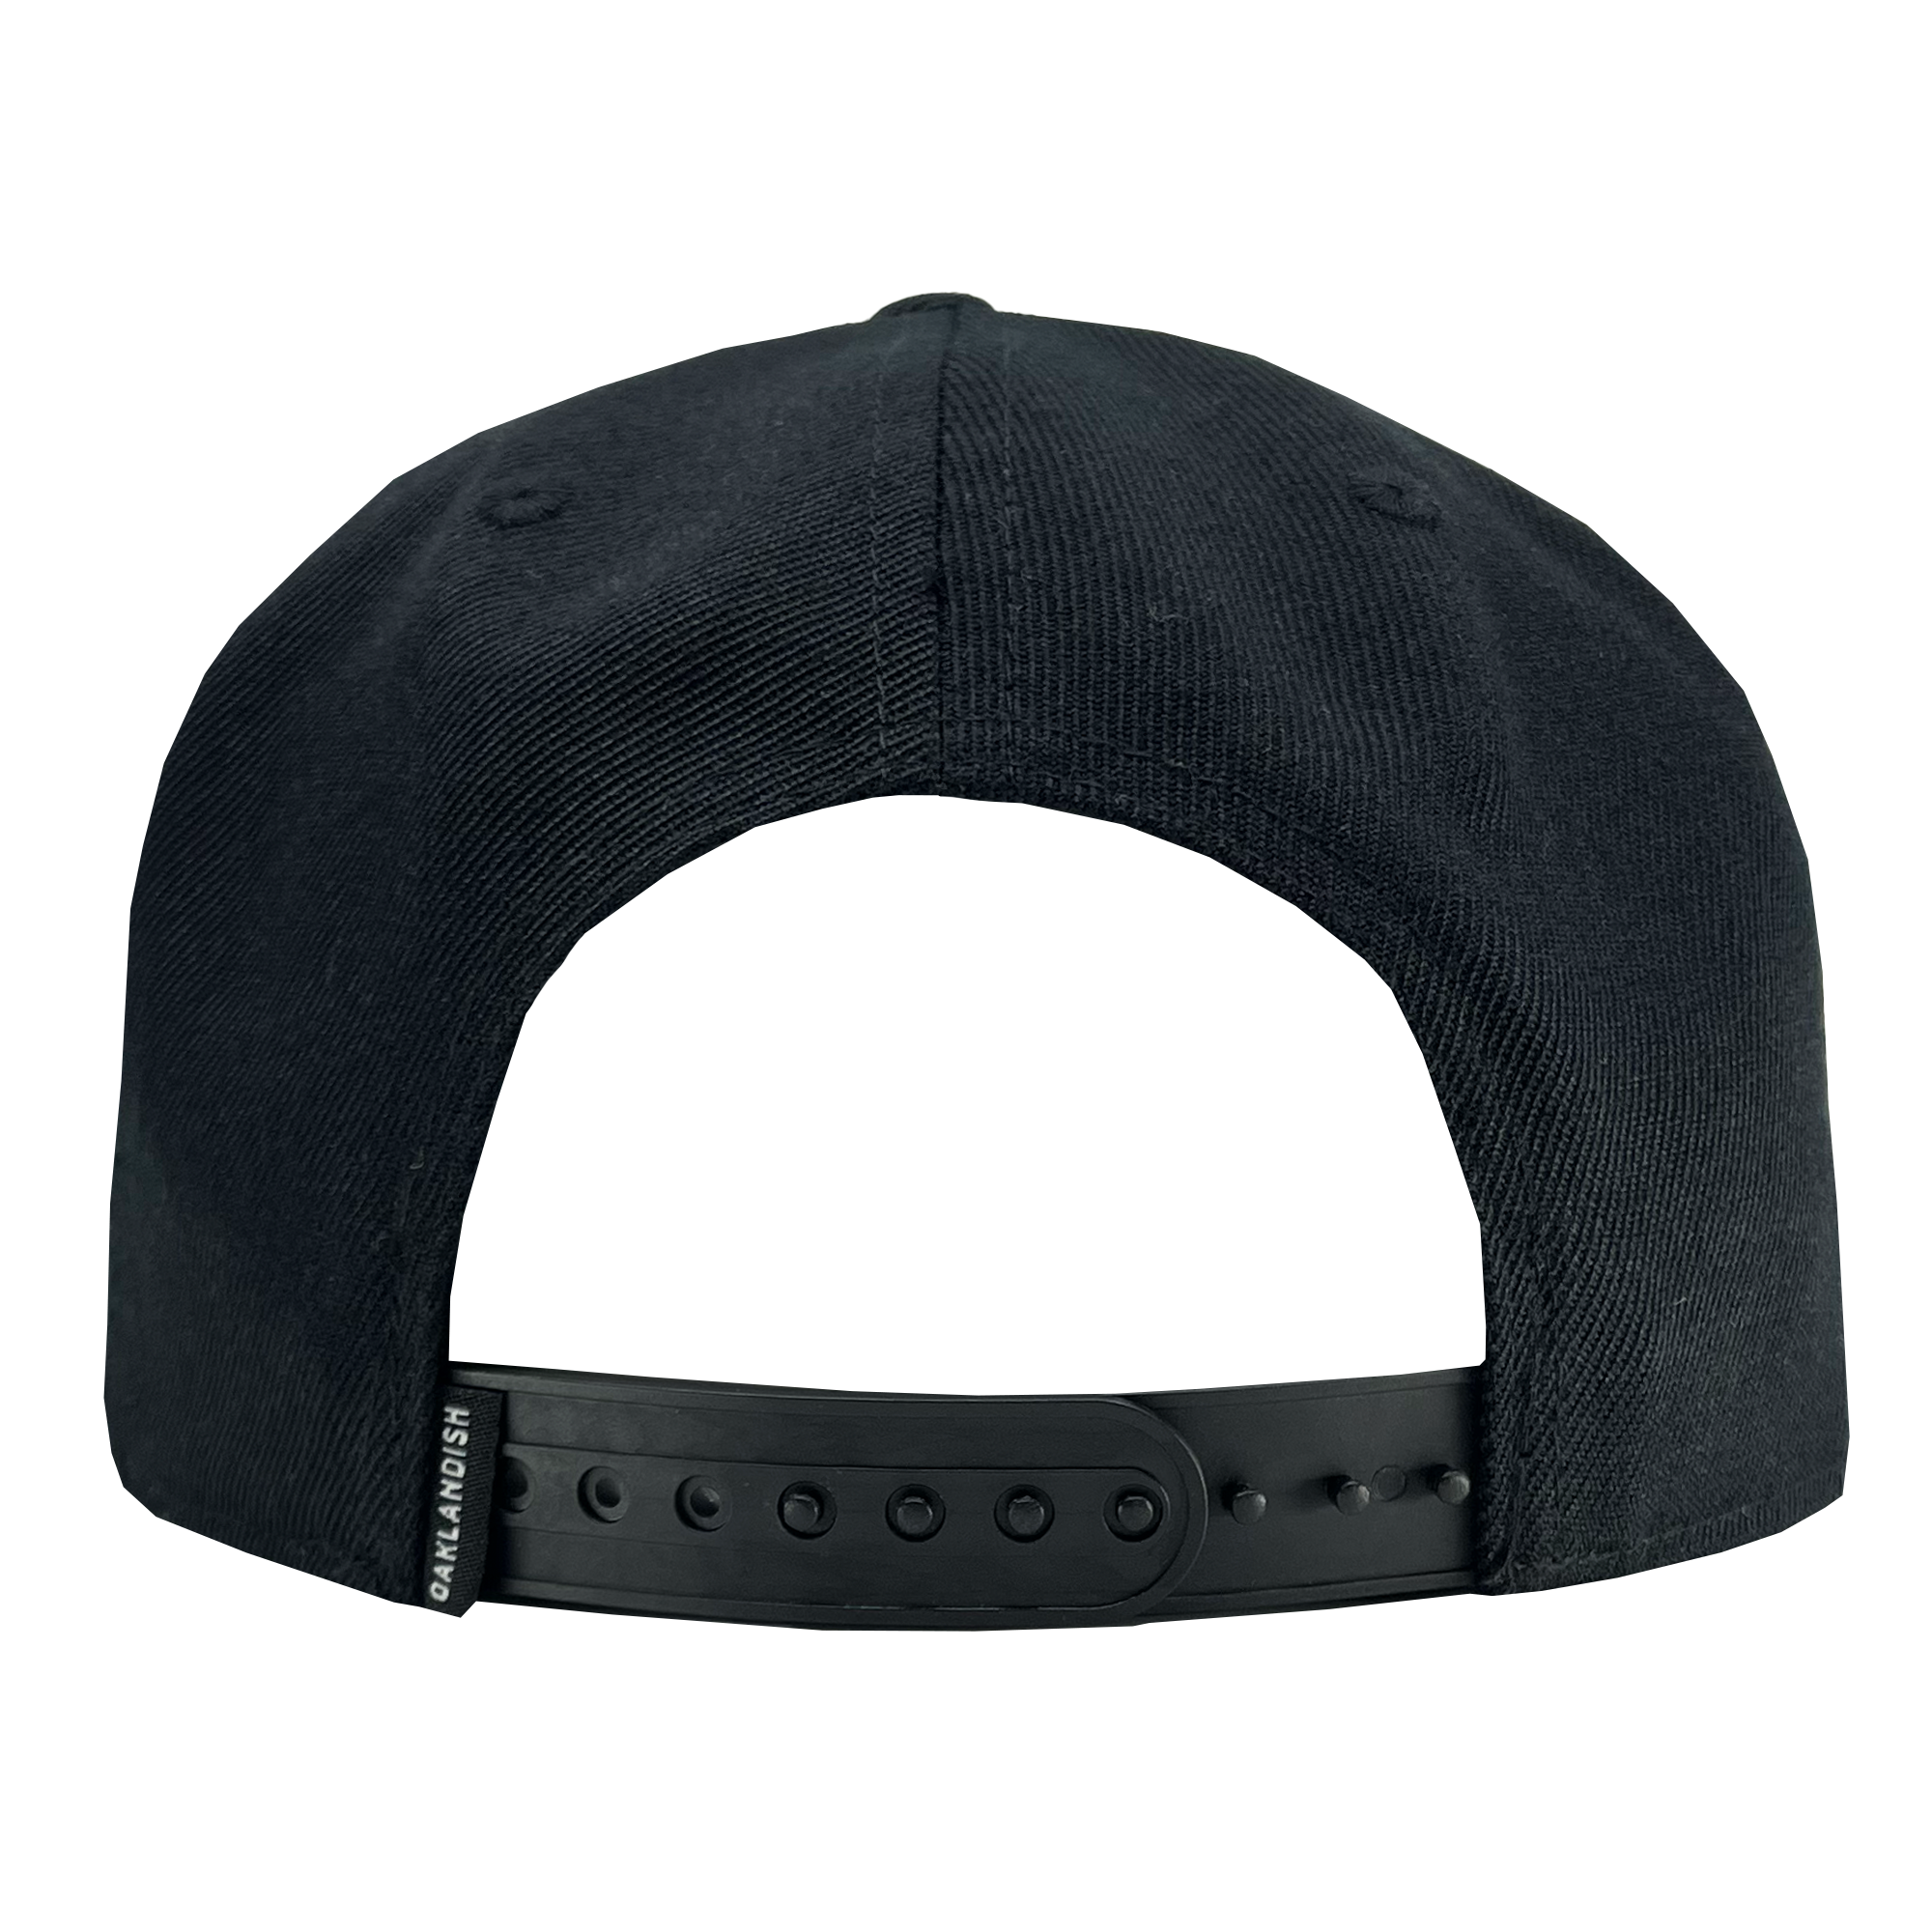 Backside view of black ball cap with adjustable snapback closure and Oaklandish wordmark tag.